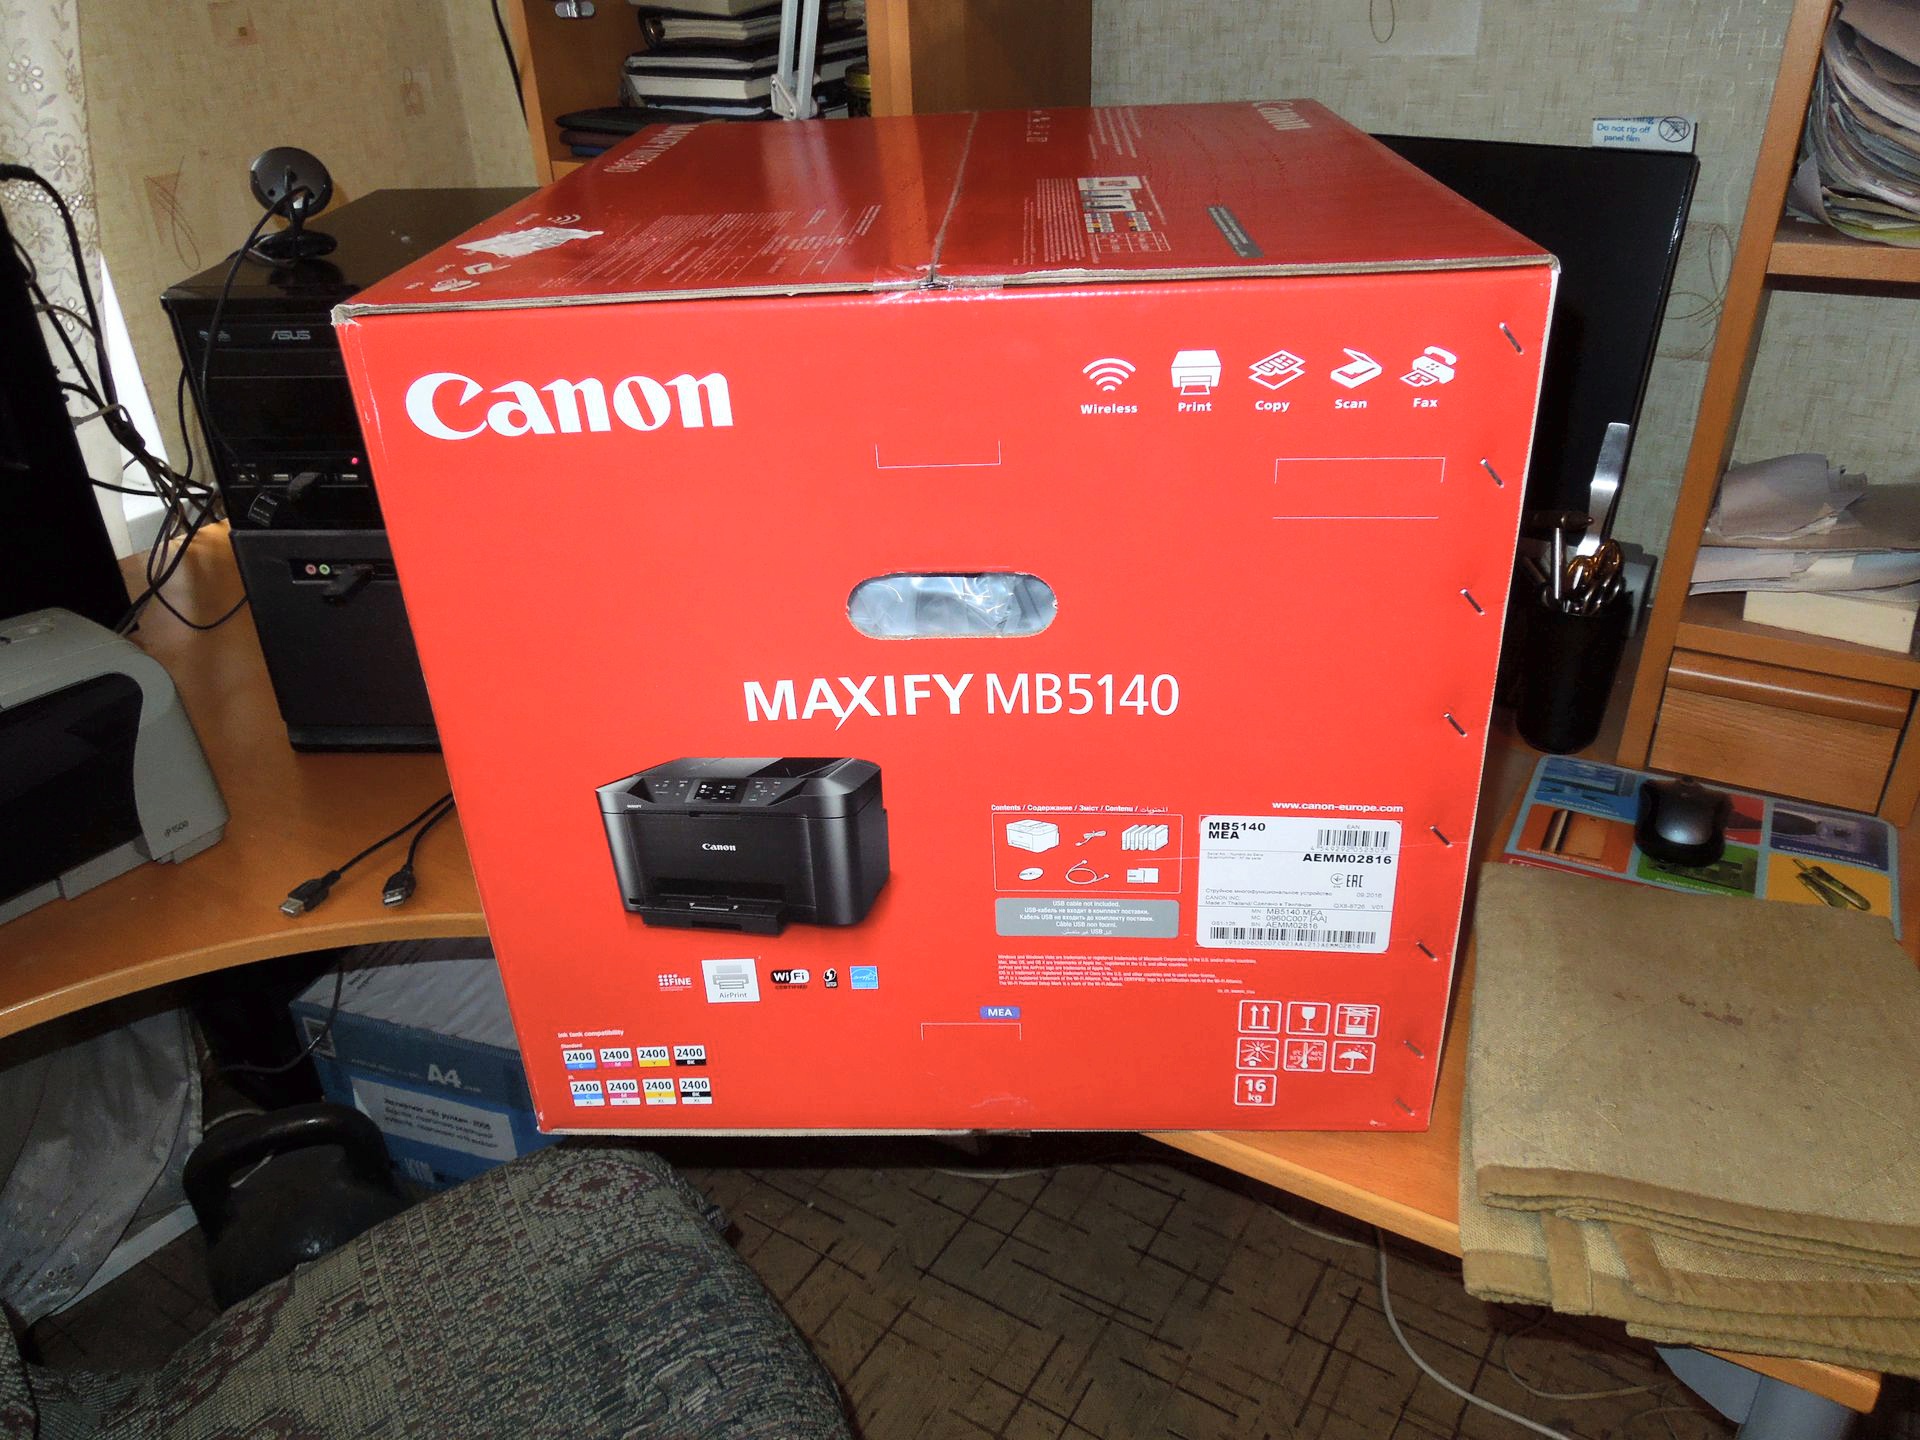 Canon maxify mb5140. Canon mb5140. Mb5140 Canon диагностика. Canon MAXIFY mb5140, цветн., a4. Mb5140 с отзывы.